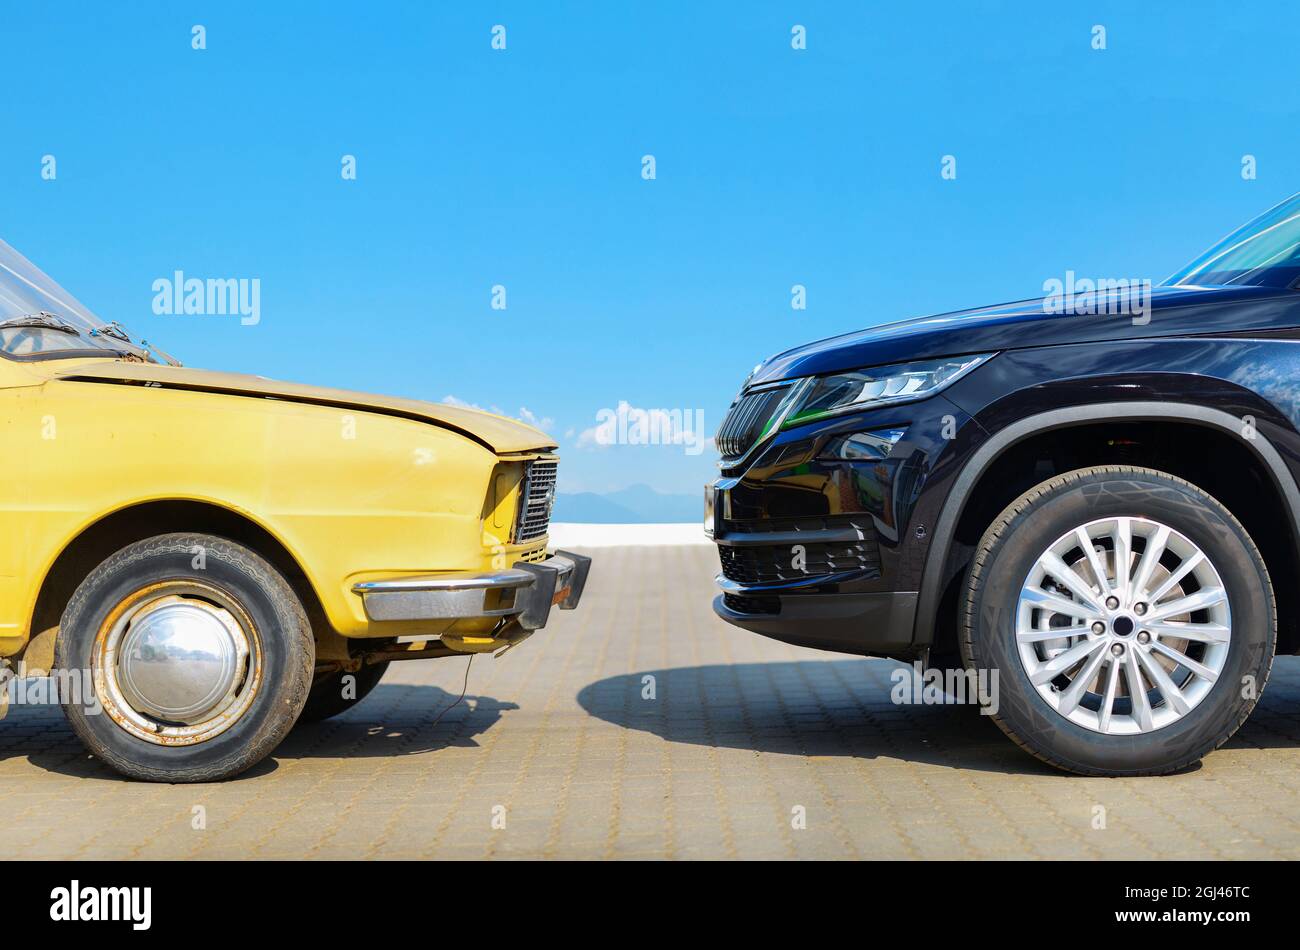 old car versus new car front face to face Stock Photo